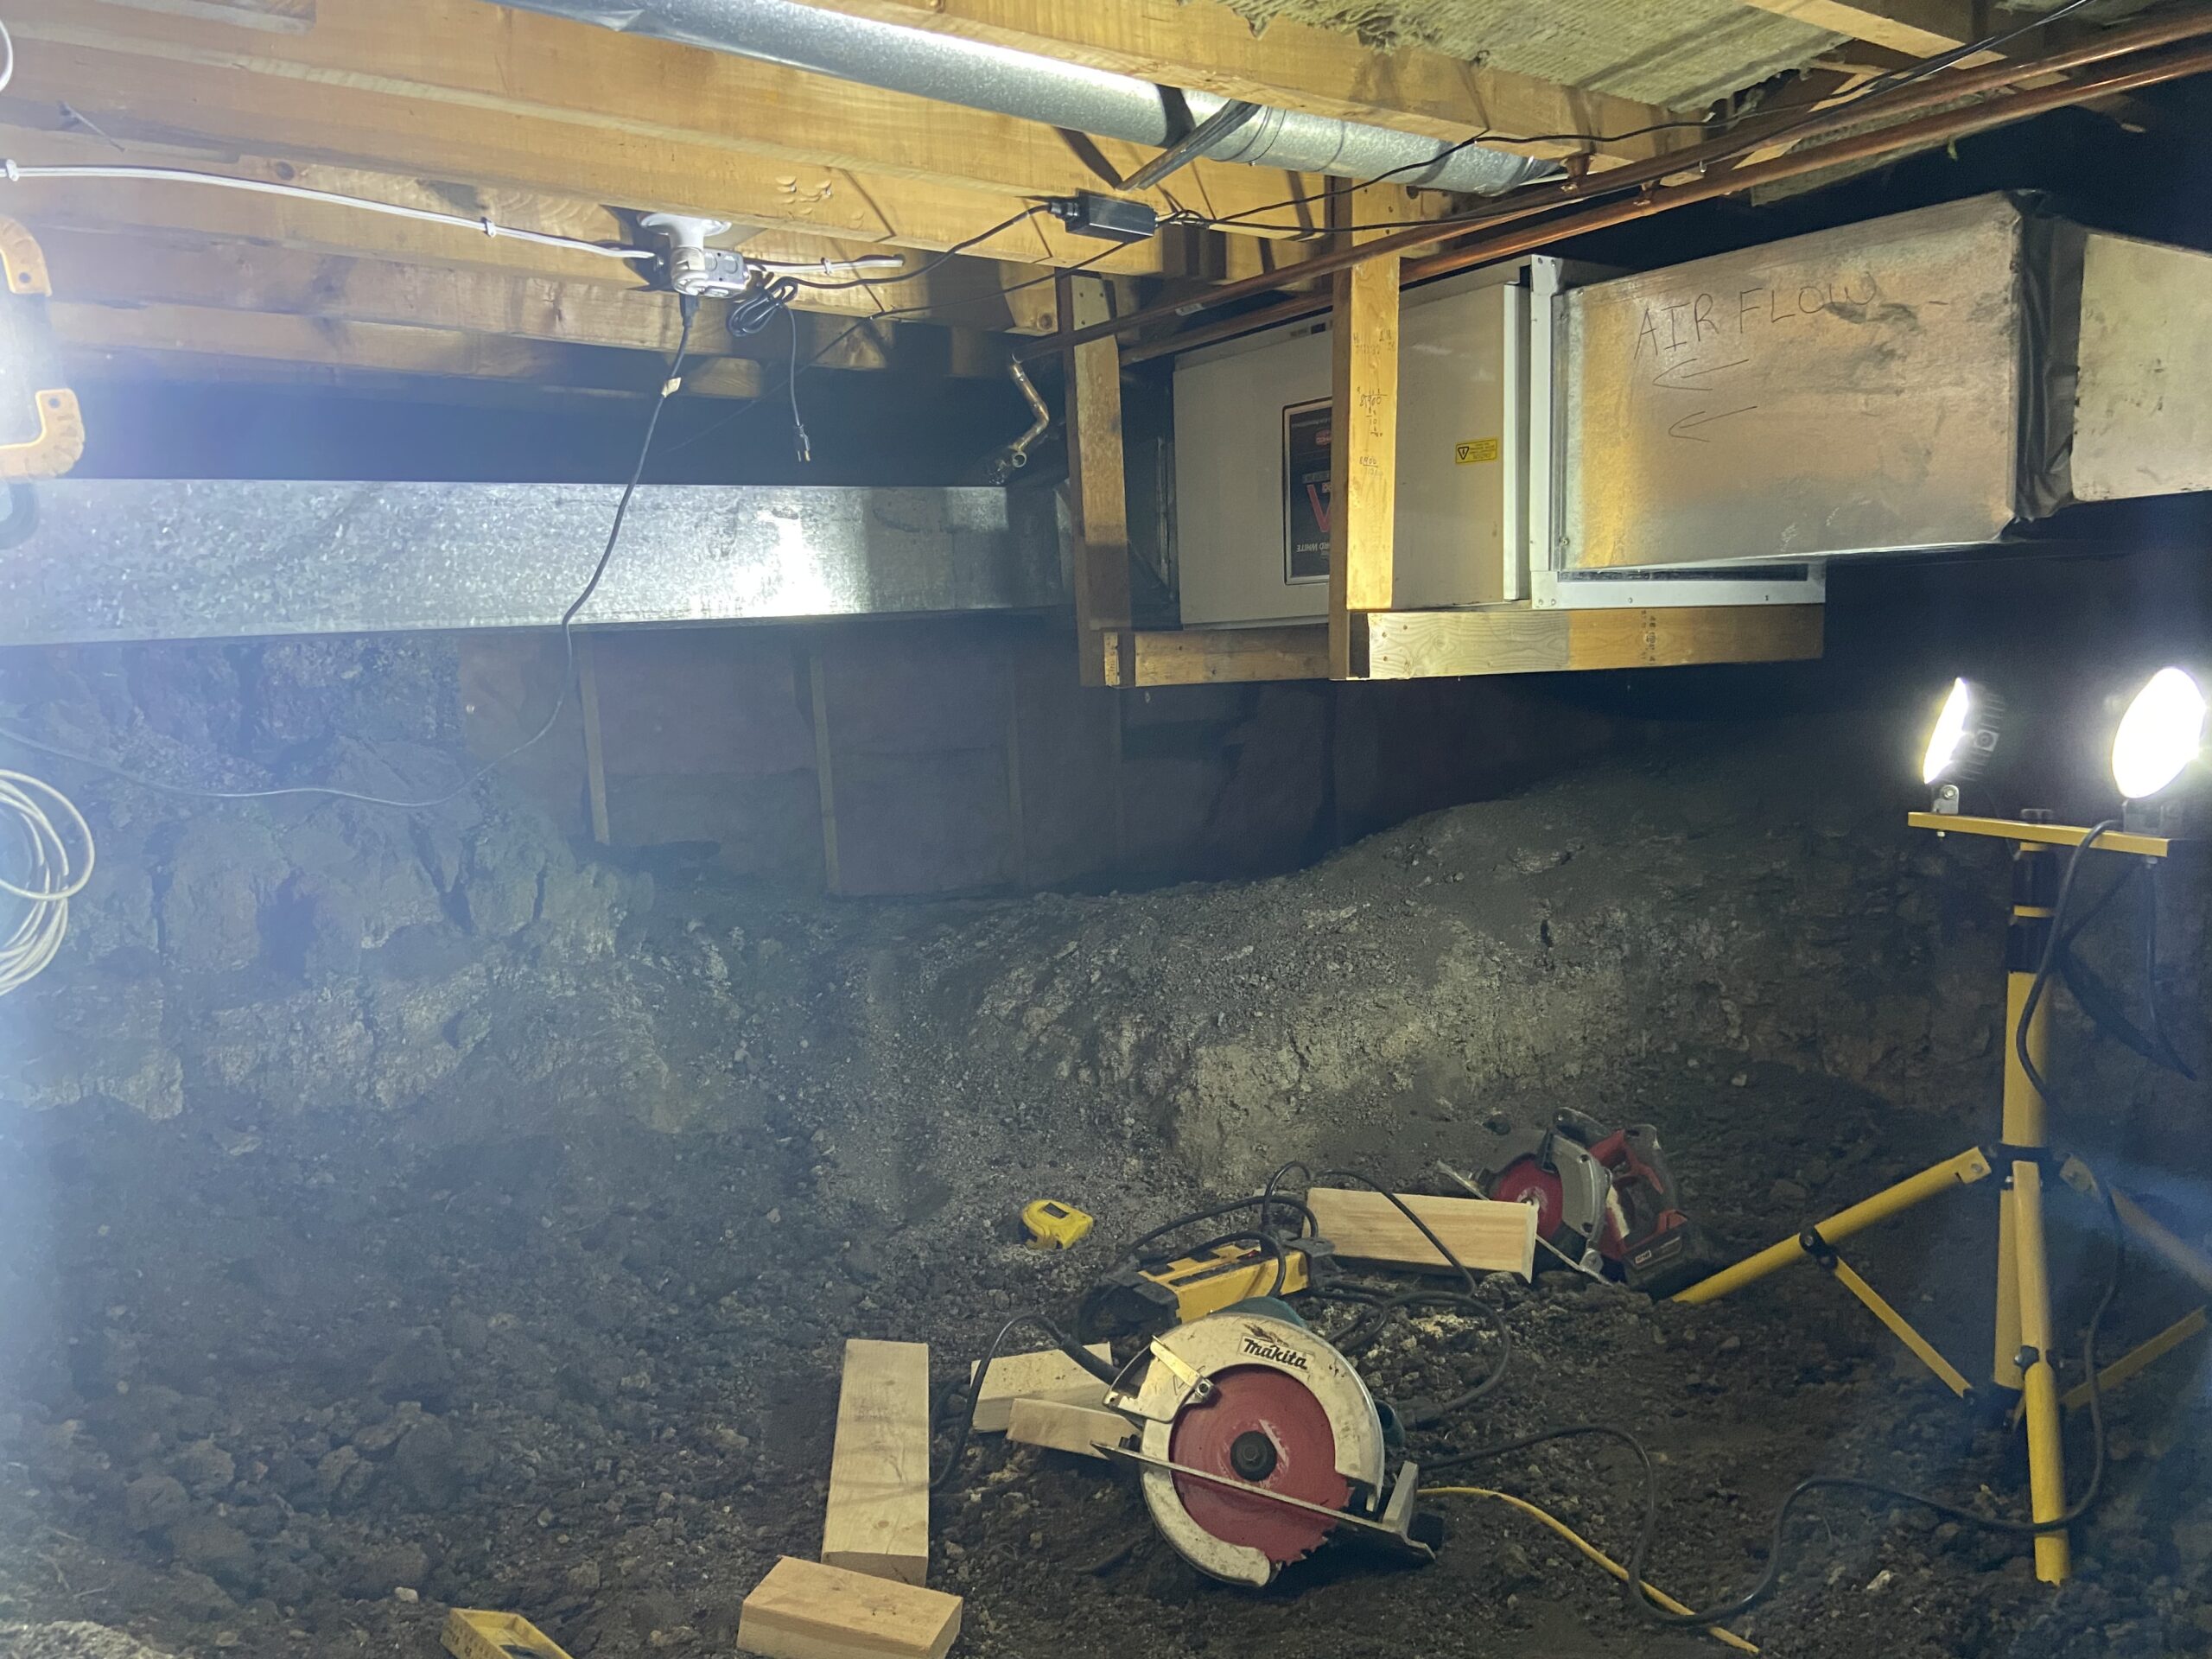 crawl space repair edmonton - abalon construction - picture of crawl space being repaired